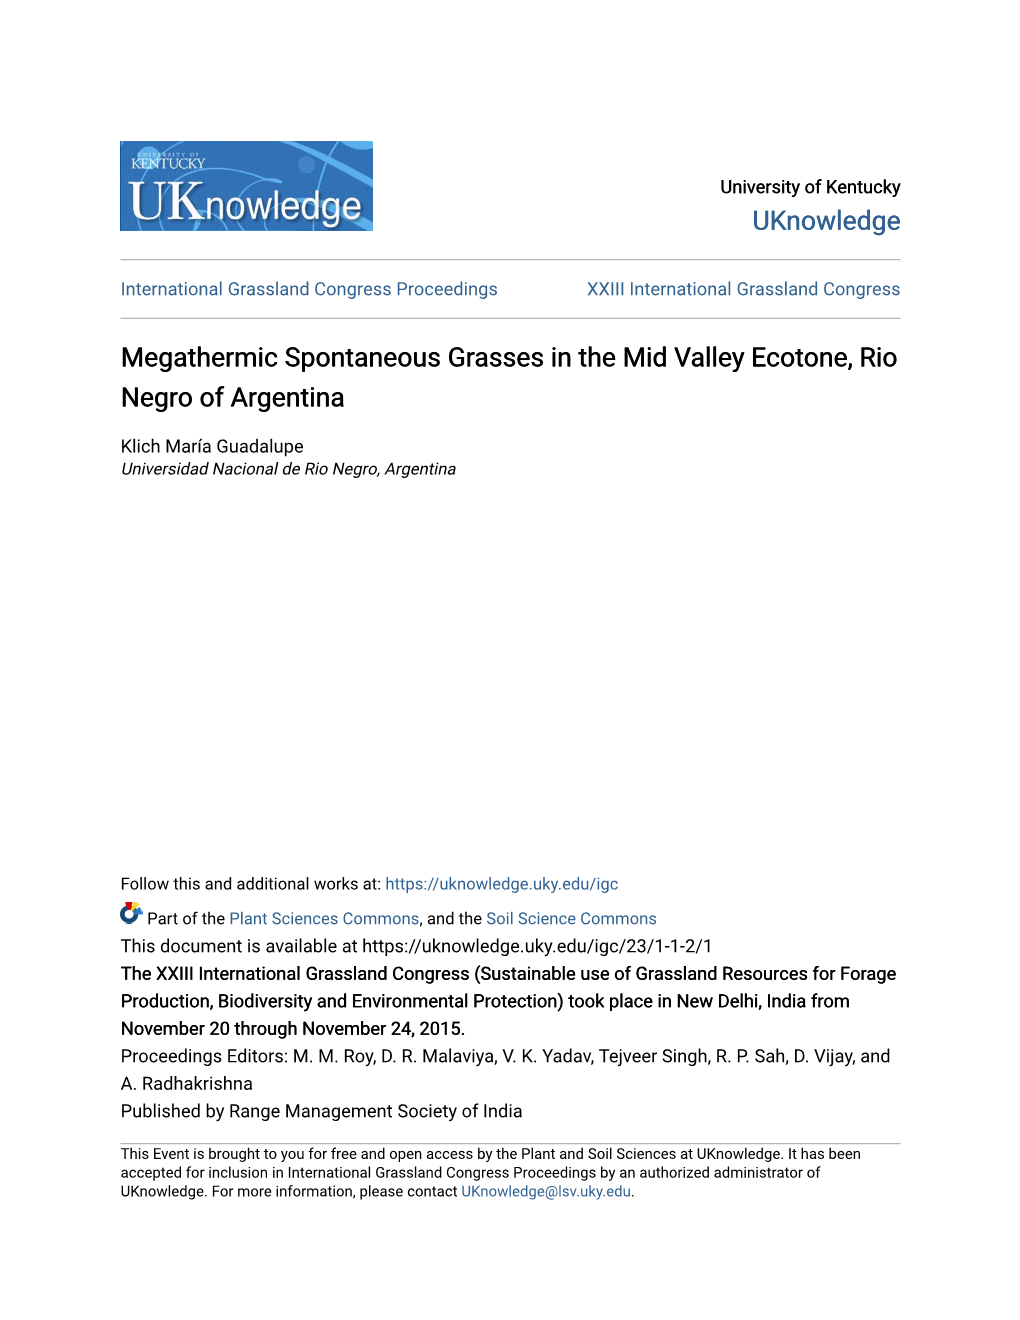 Megathermic Spontaneous Grasses in the Mid Valley Ecotone, Rio Negro of Argentina